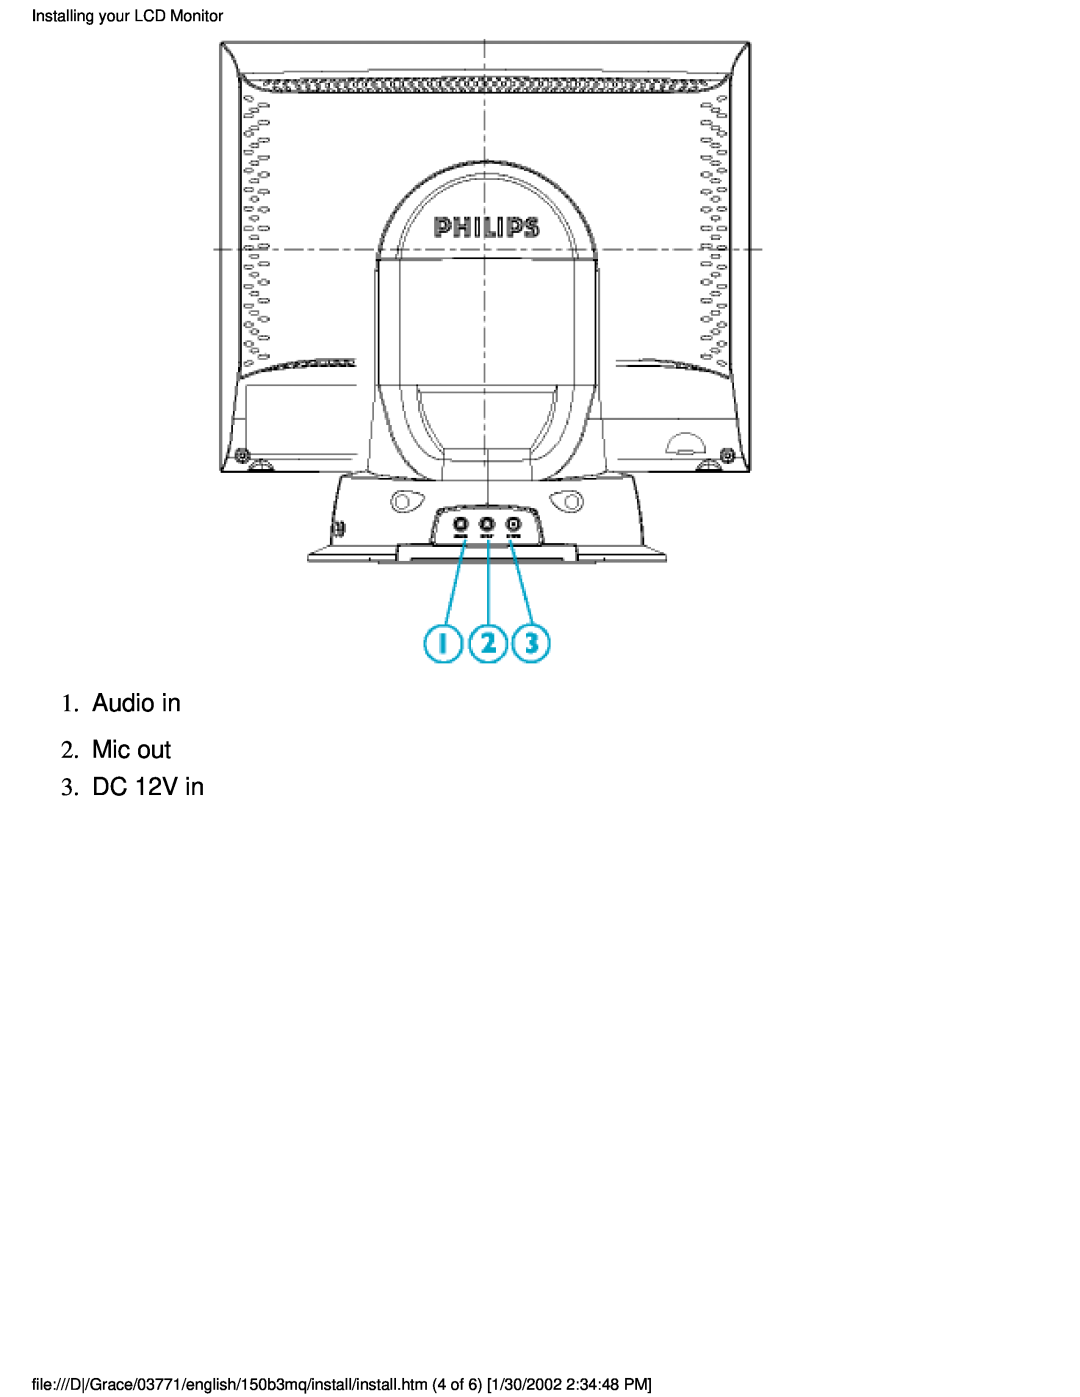 Philips 150B3M/150B3Q user manual Audio in 2.Mic out 3.DC 12V in, Installing your LCD Monitor 